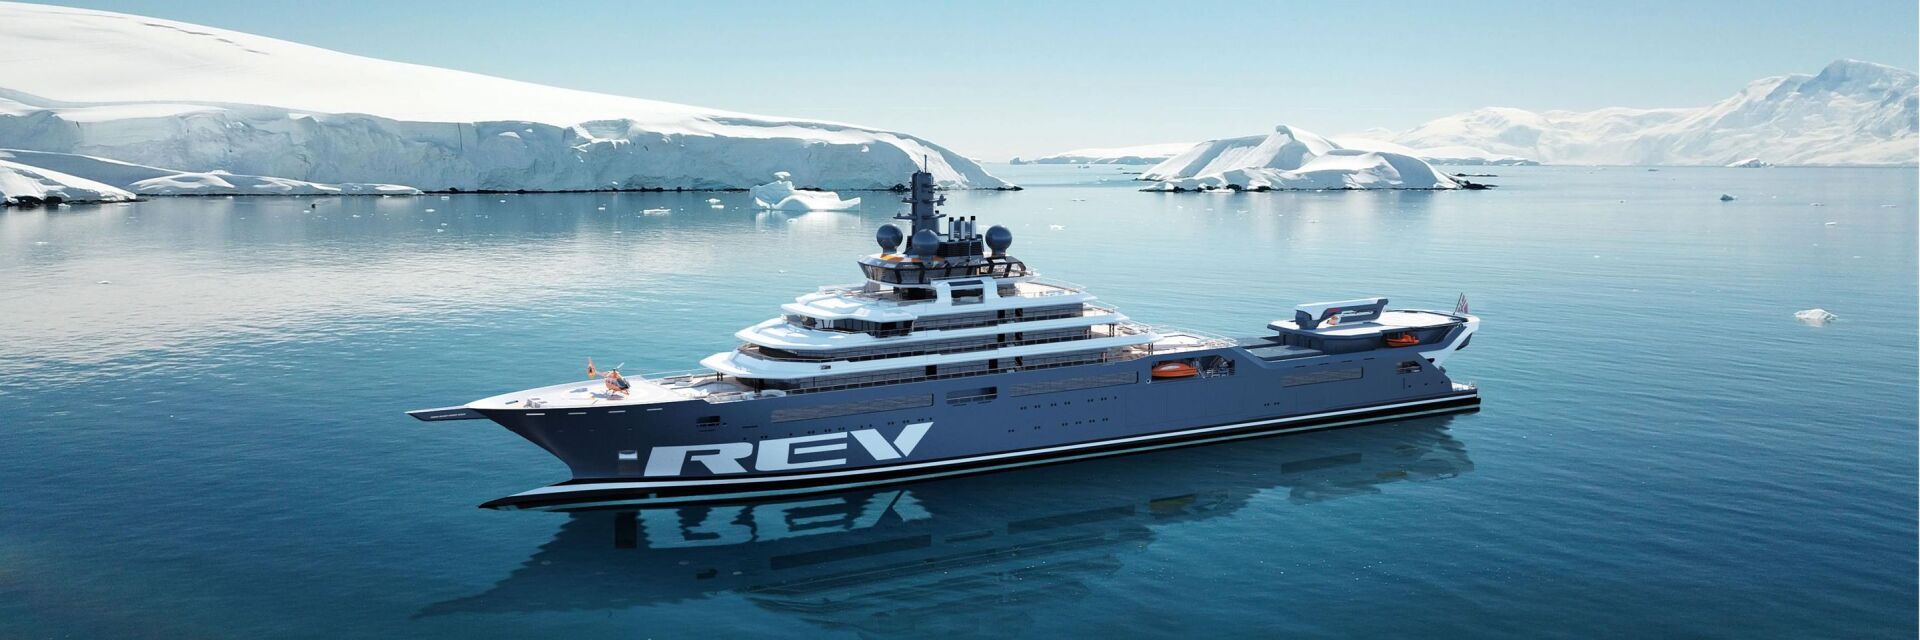 Longest motor yacht: 182.9m (600') research expedition vessel sets world record